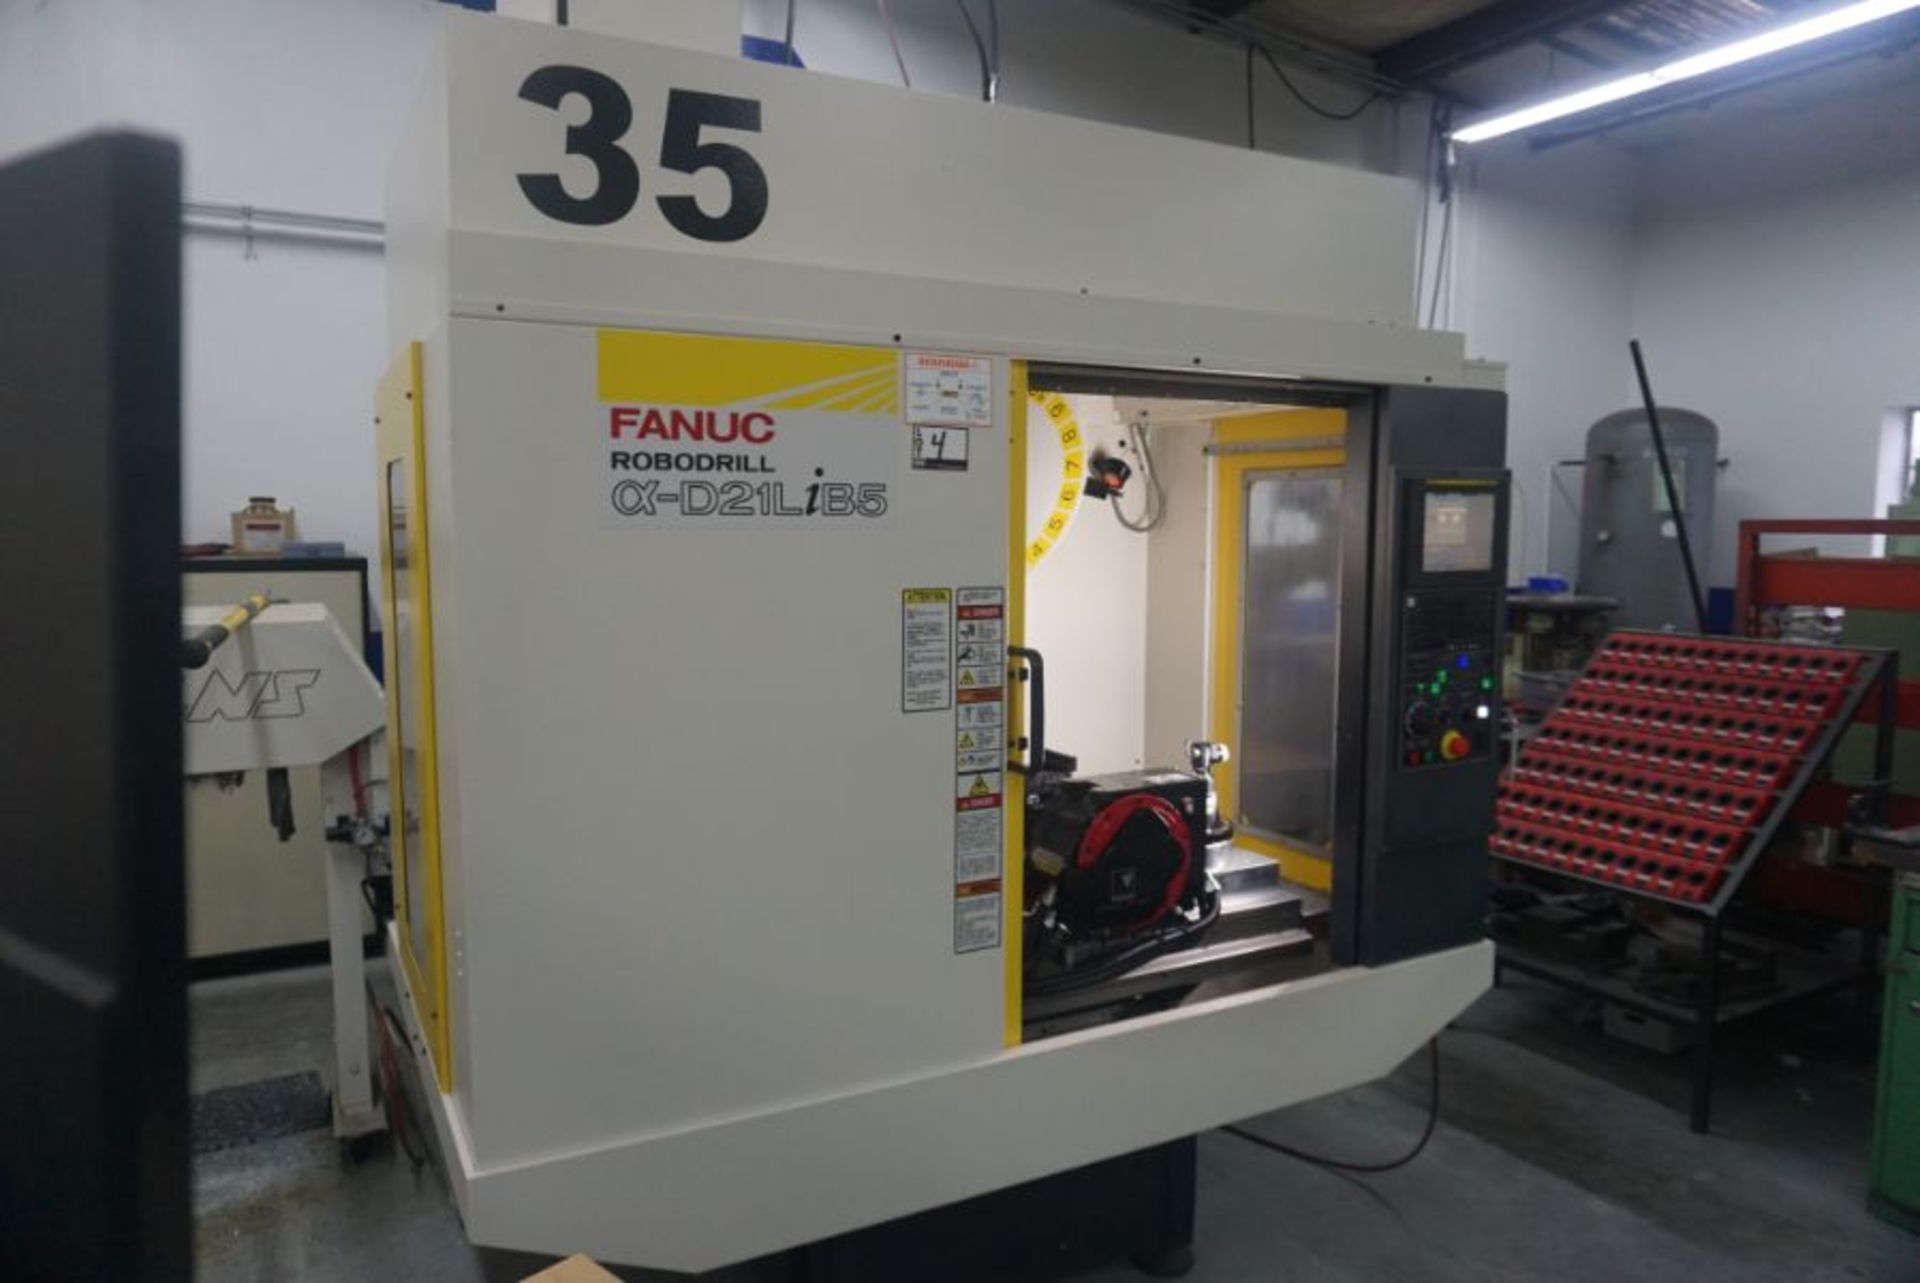 Fanuc Robodrill D21LiB5 5-Axis Vertical Machining Center, New 2018 *with Lots 5 & 6* - Image 2 of 10